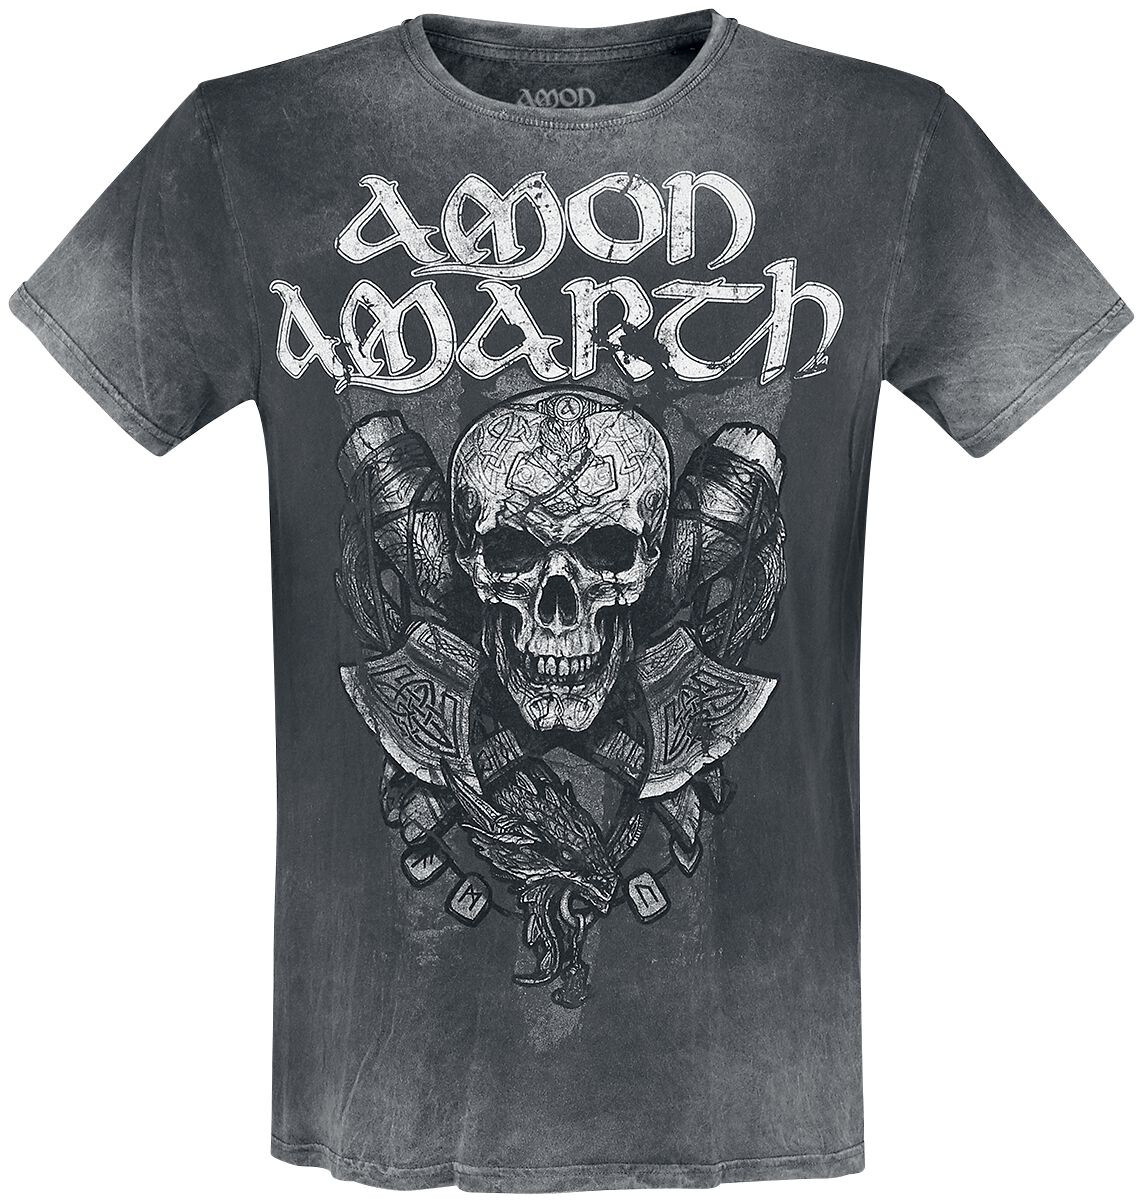 Merchandise Amon Amarth Festivaly Eu Check out our amon amarth merch selection for the very best in unique or custom, handmade pieces from our did you scroll all this way to get facts about amon amarth merch? merchandise amon amarth festivaly eu